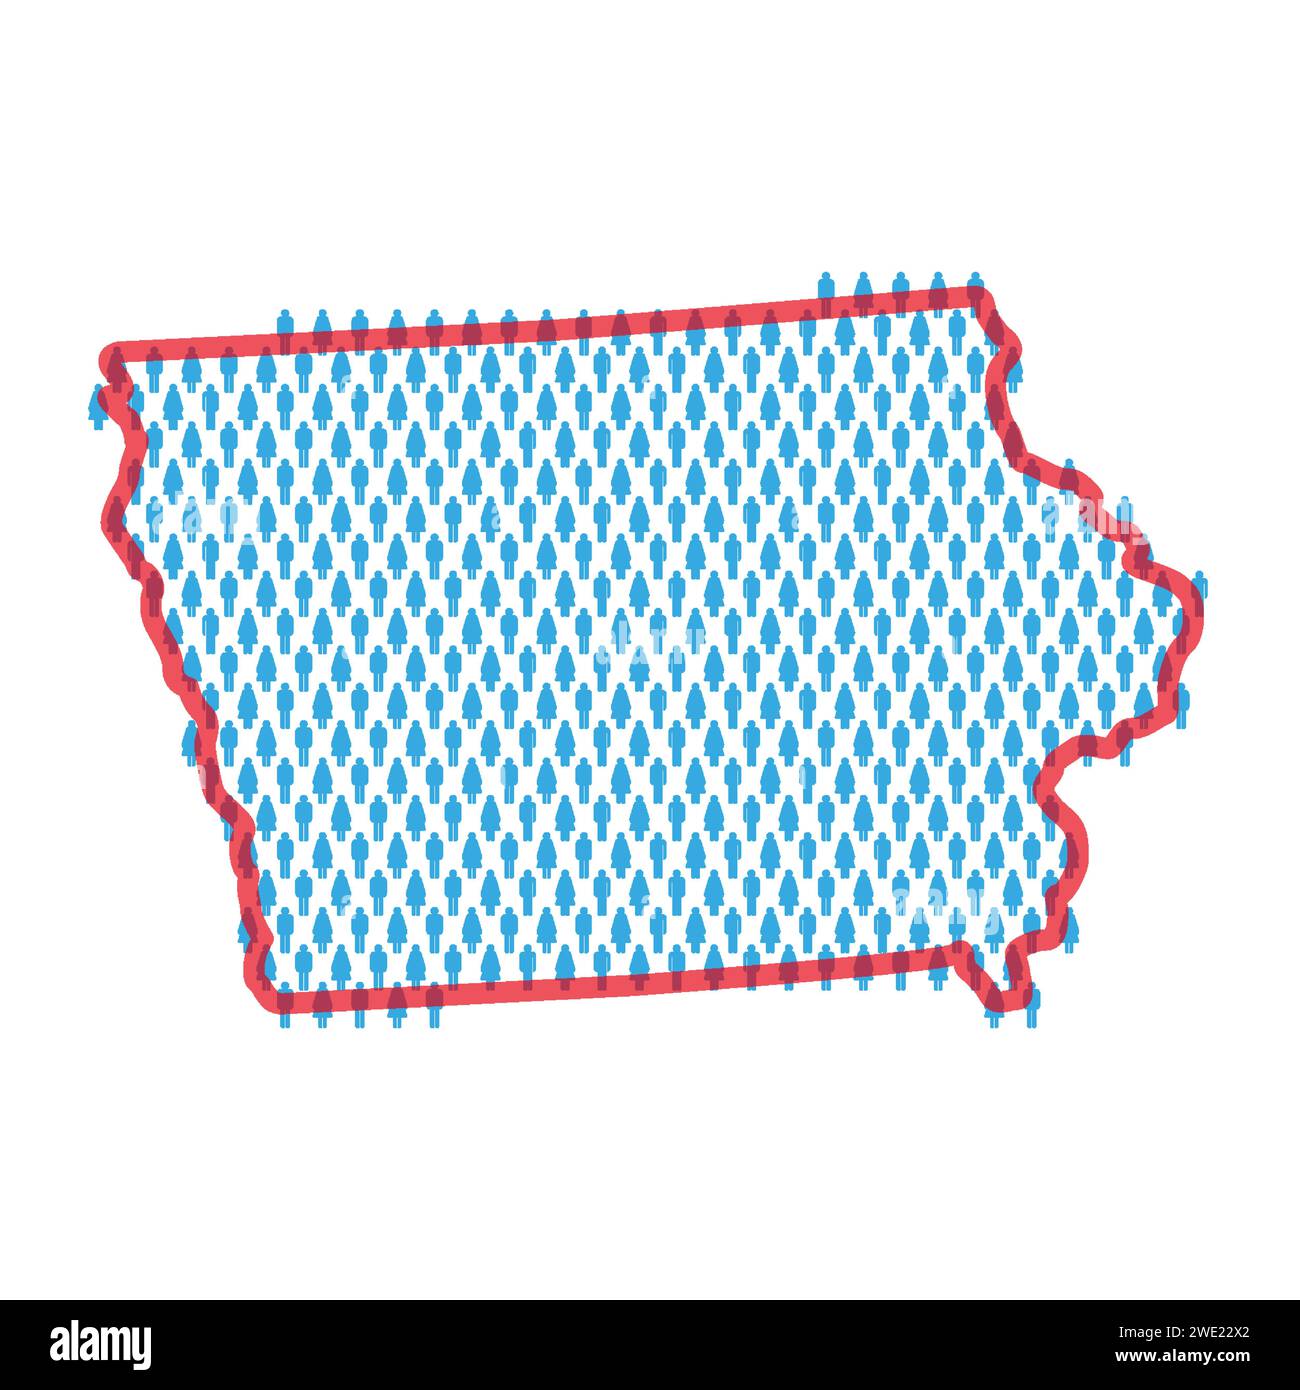 Iowa population map. Stick figures people map with bold red translucent state border. Pattern of men and women icons. Isolated vector illustration. Ed Stock Vector